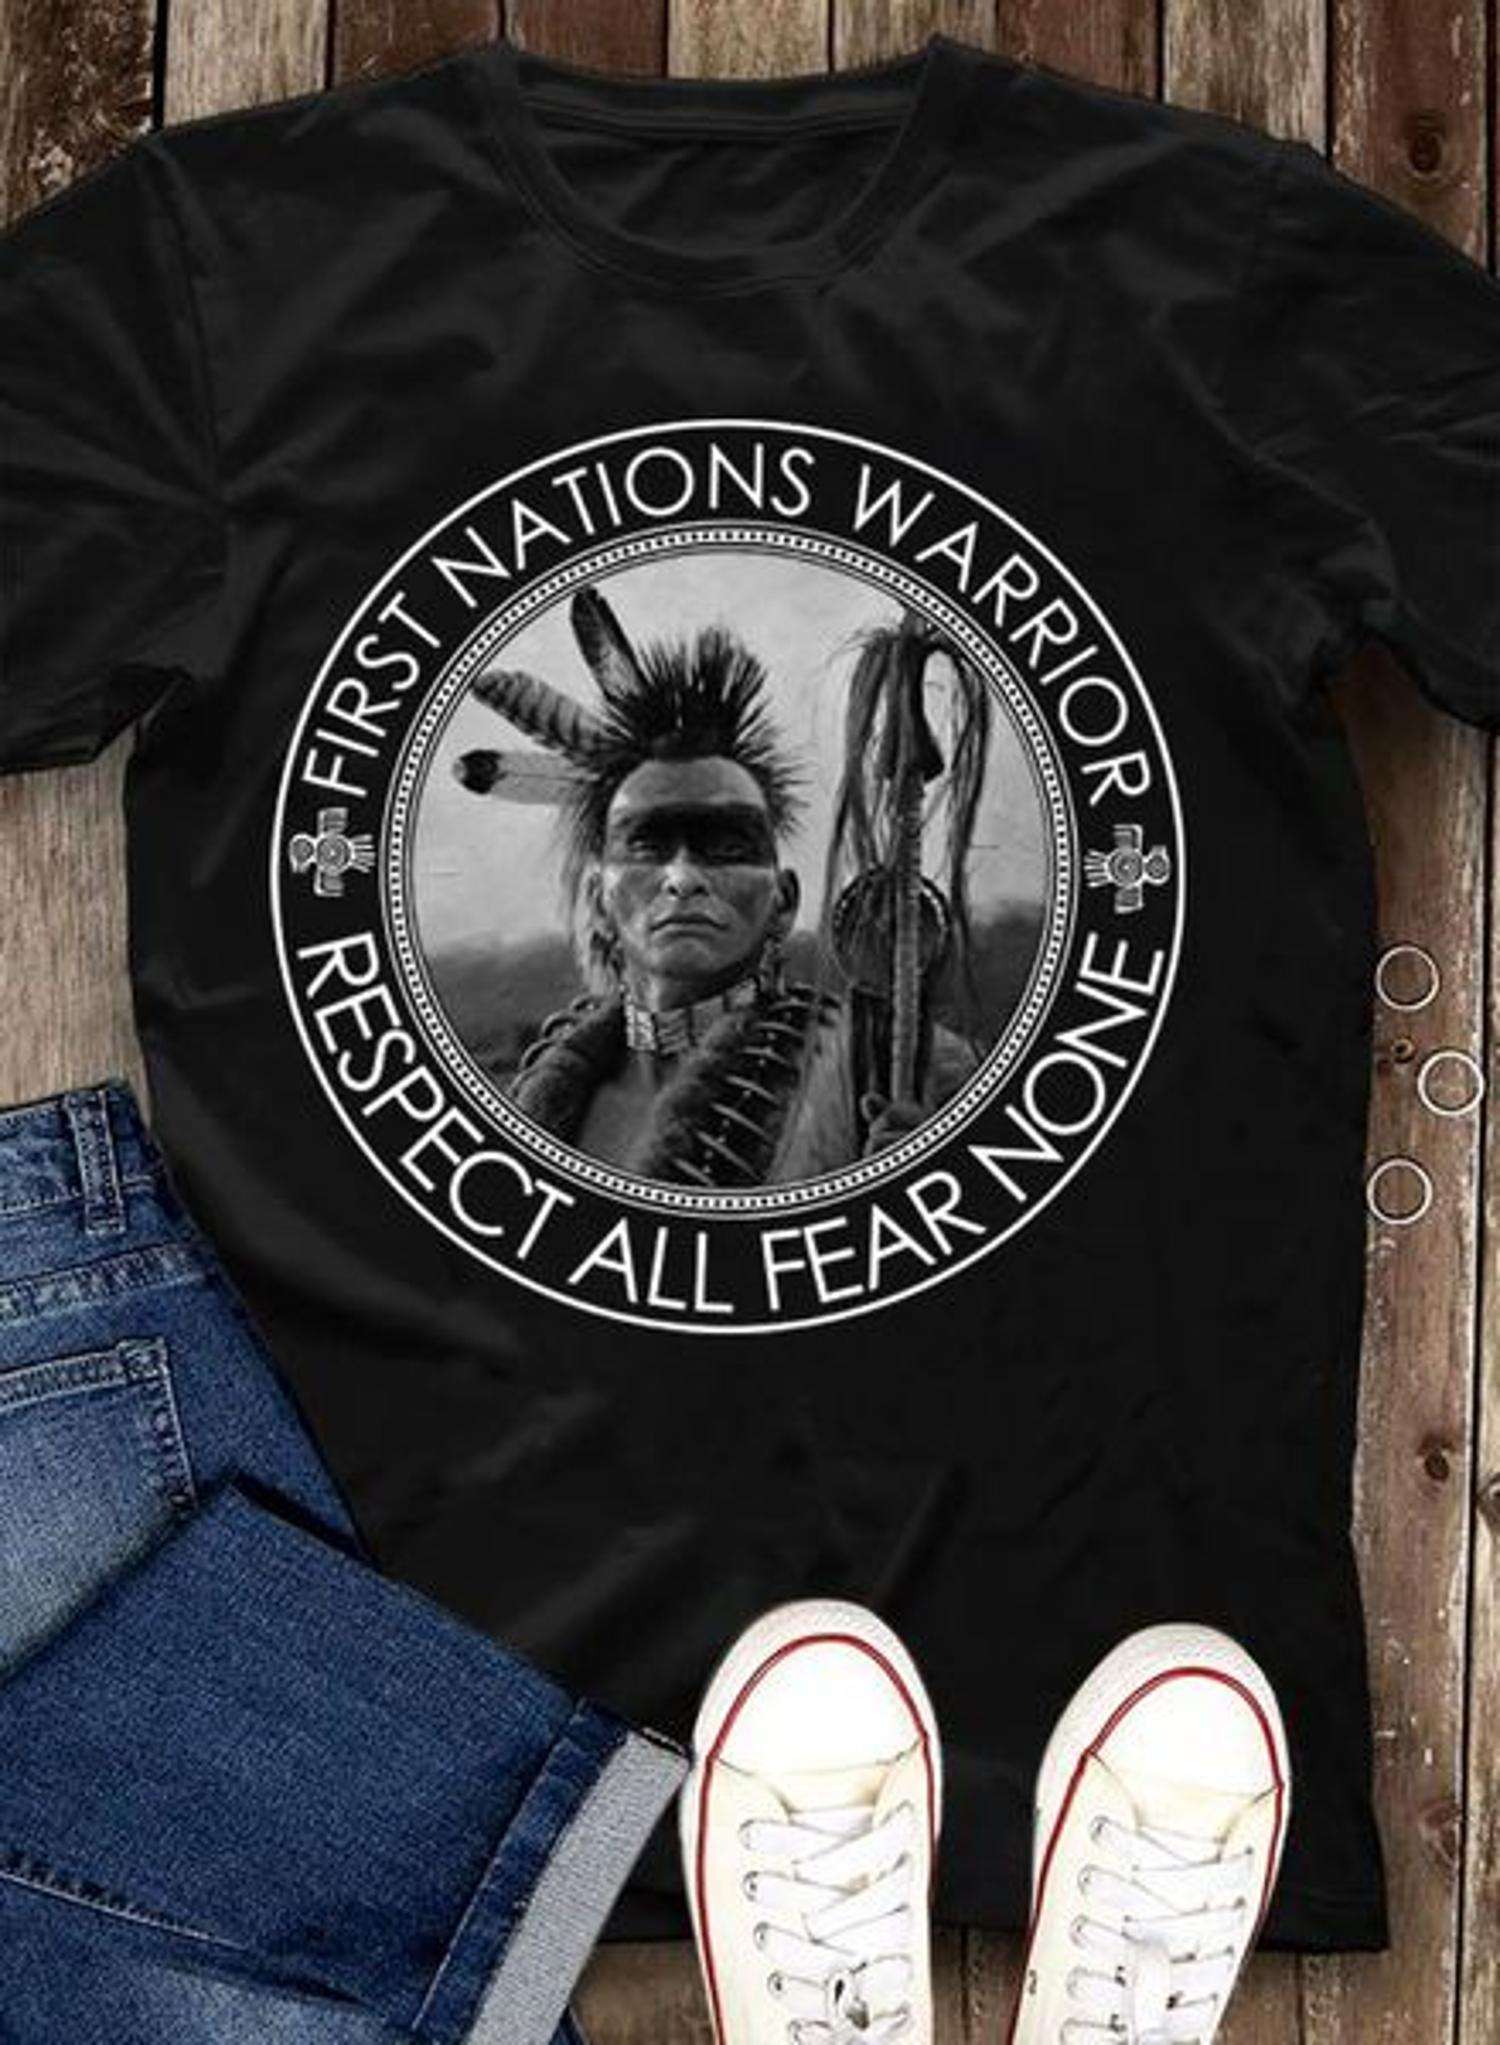 First nations warrior, respect all fear none - Native American, Native warriors